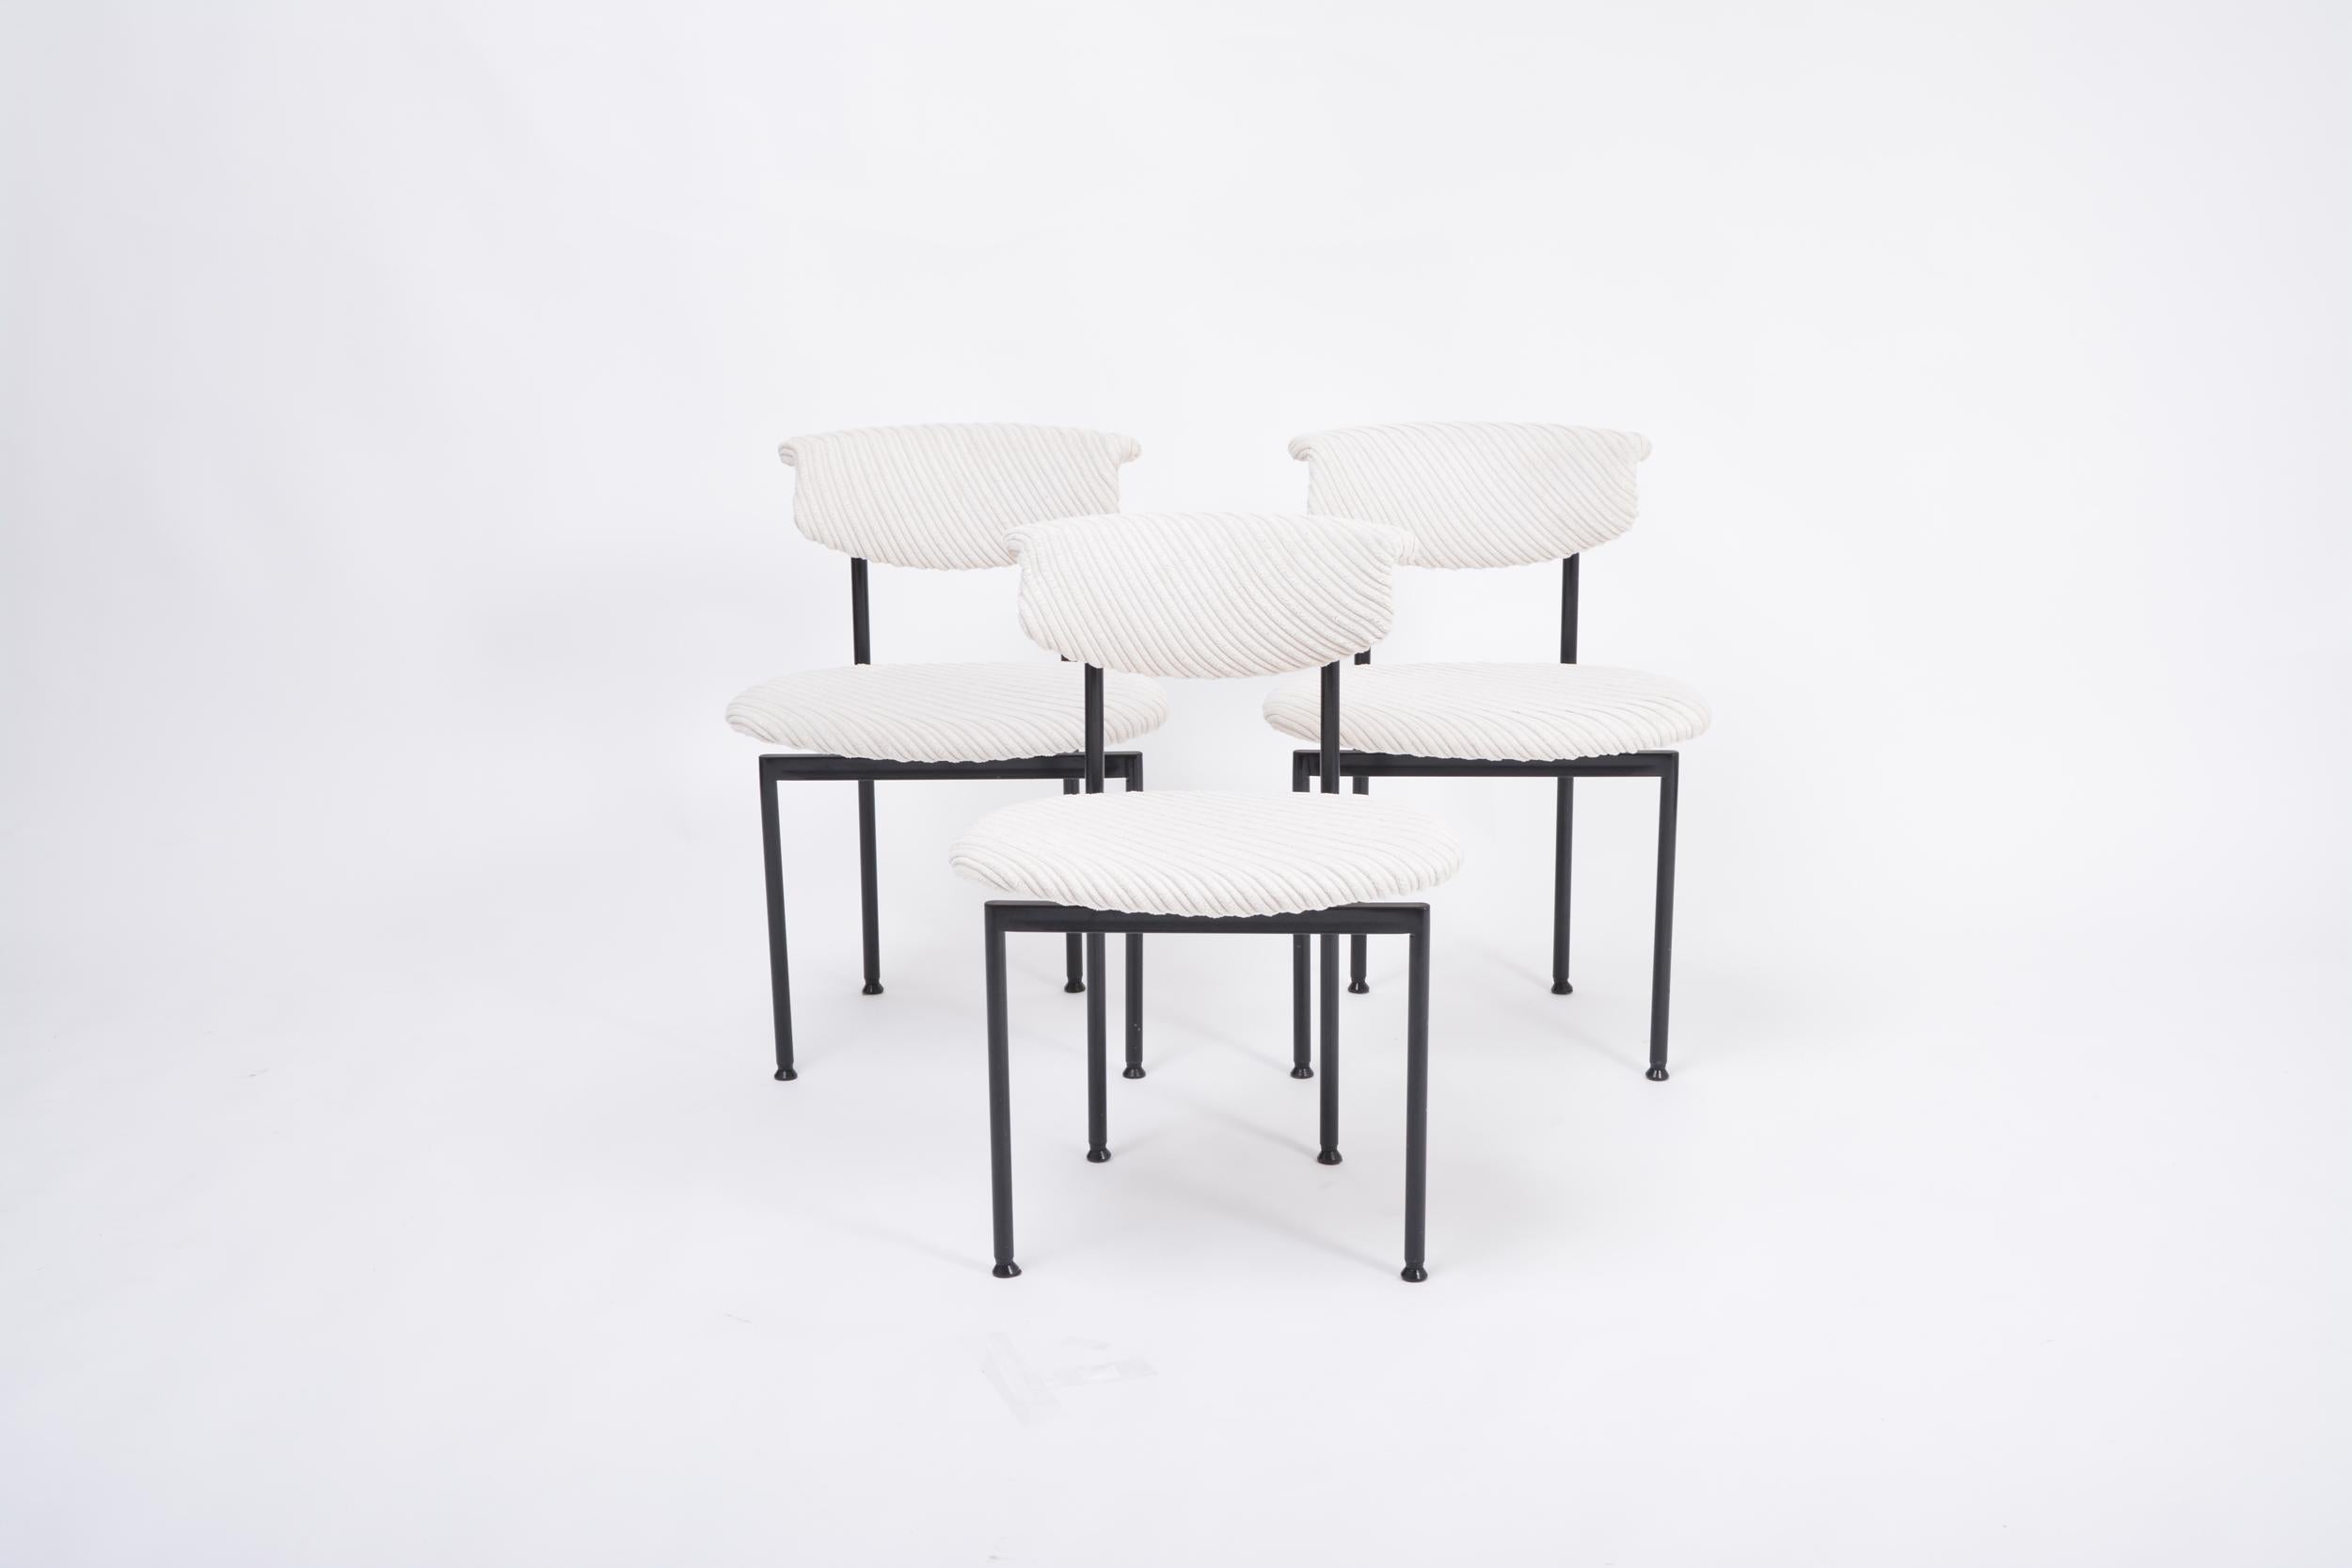 Set of three dining chairs, model alpha from the Meander series, designed by Rudolf Wolf. Manufactured by Meander (Netherlands) in the 1960s. Black lackered steel structure. The chairs have been reupholstered with a white structured fabric.

Rudolf